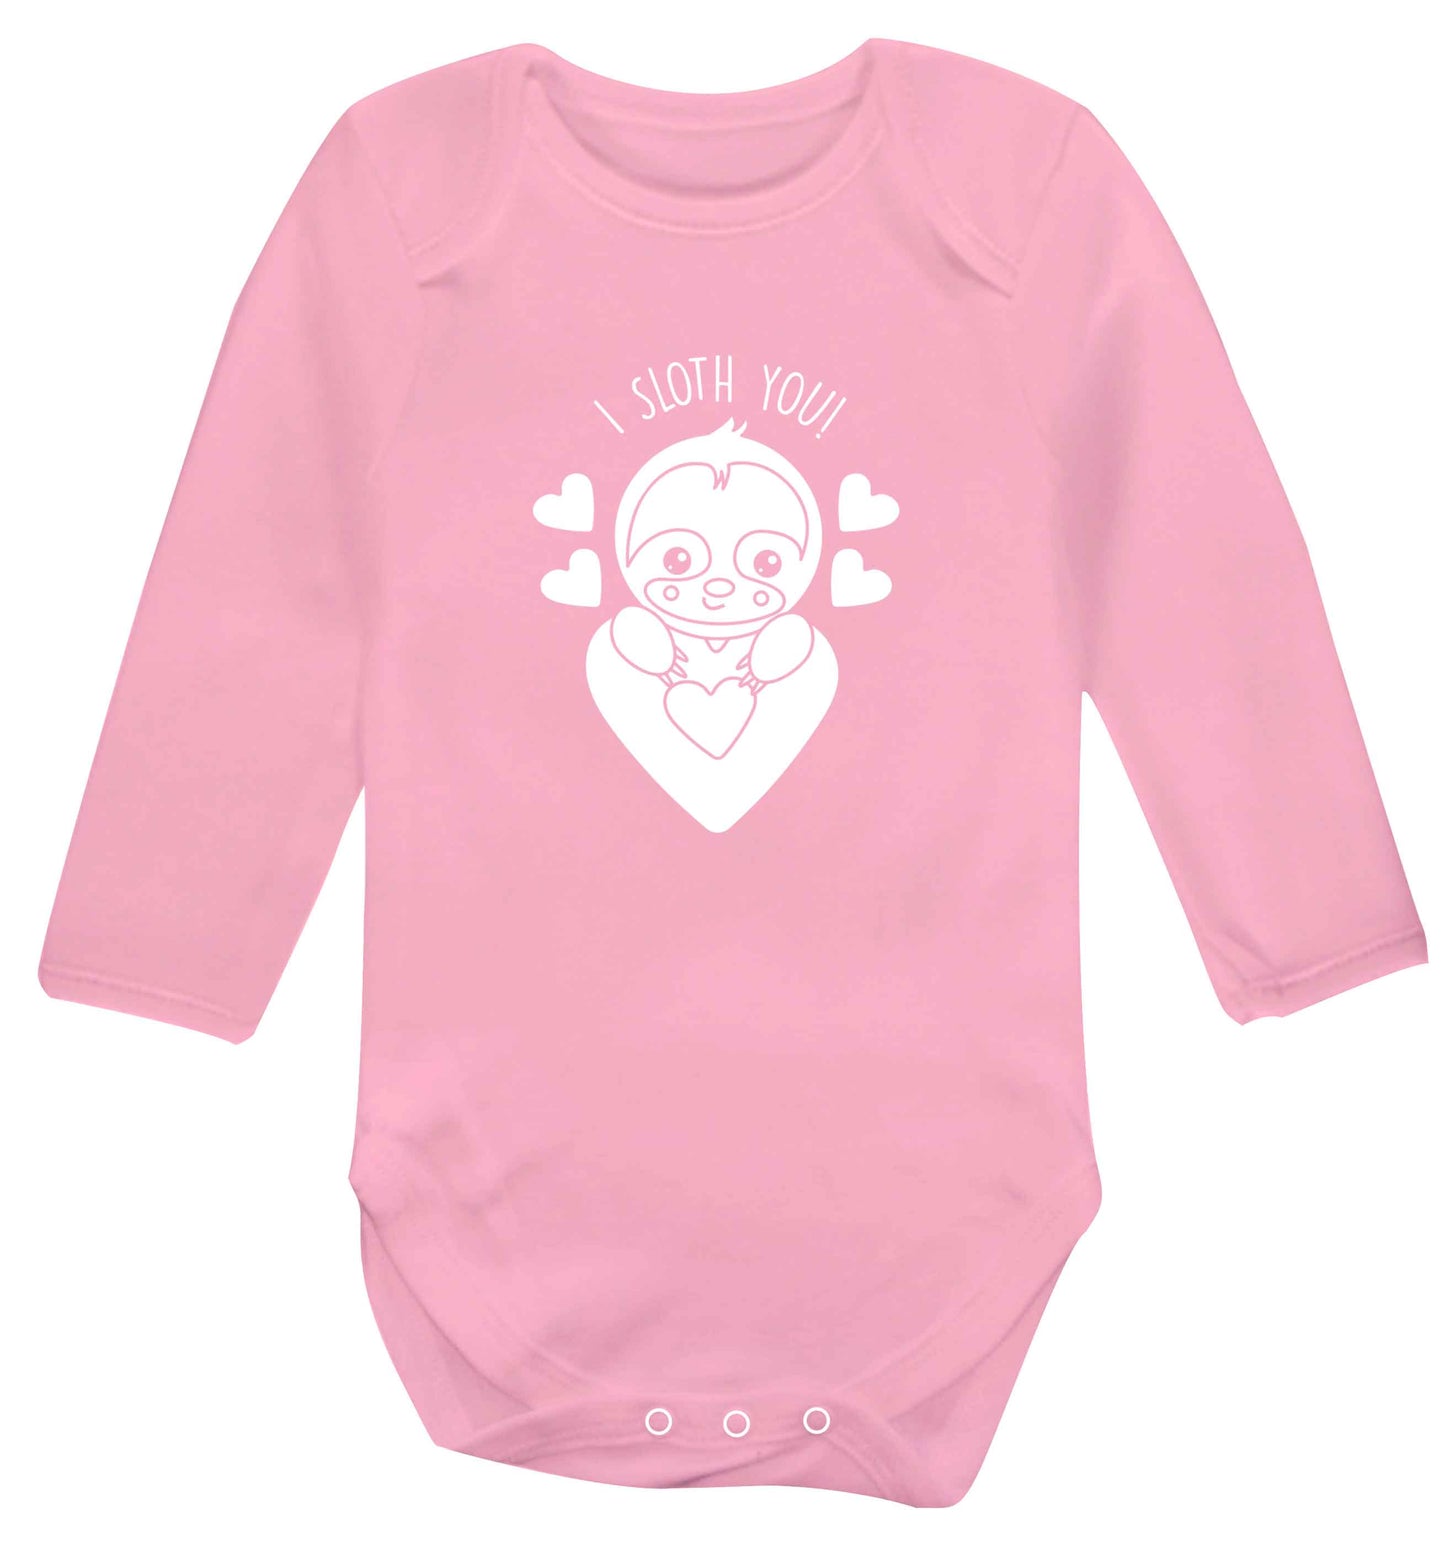 I sloth you baby vest long sleeved pale pink 6-12 months